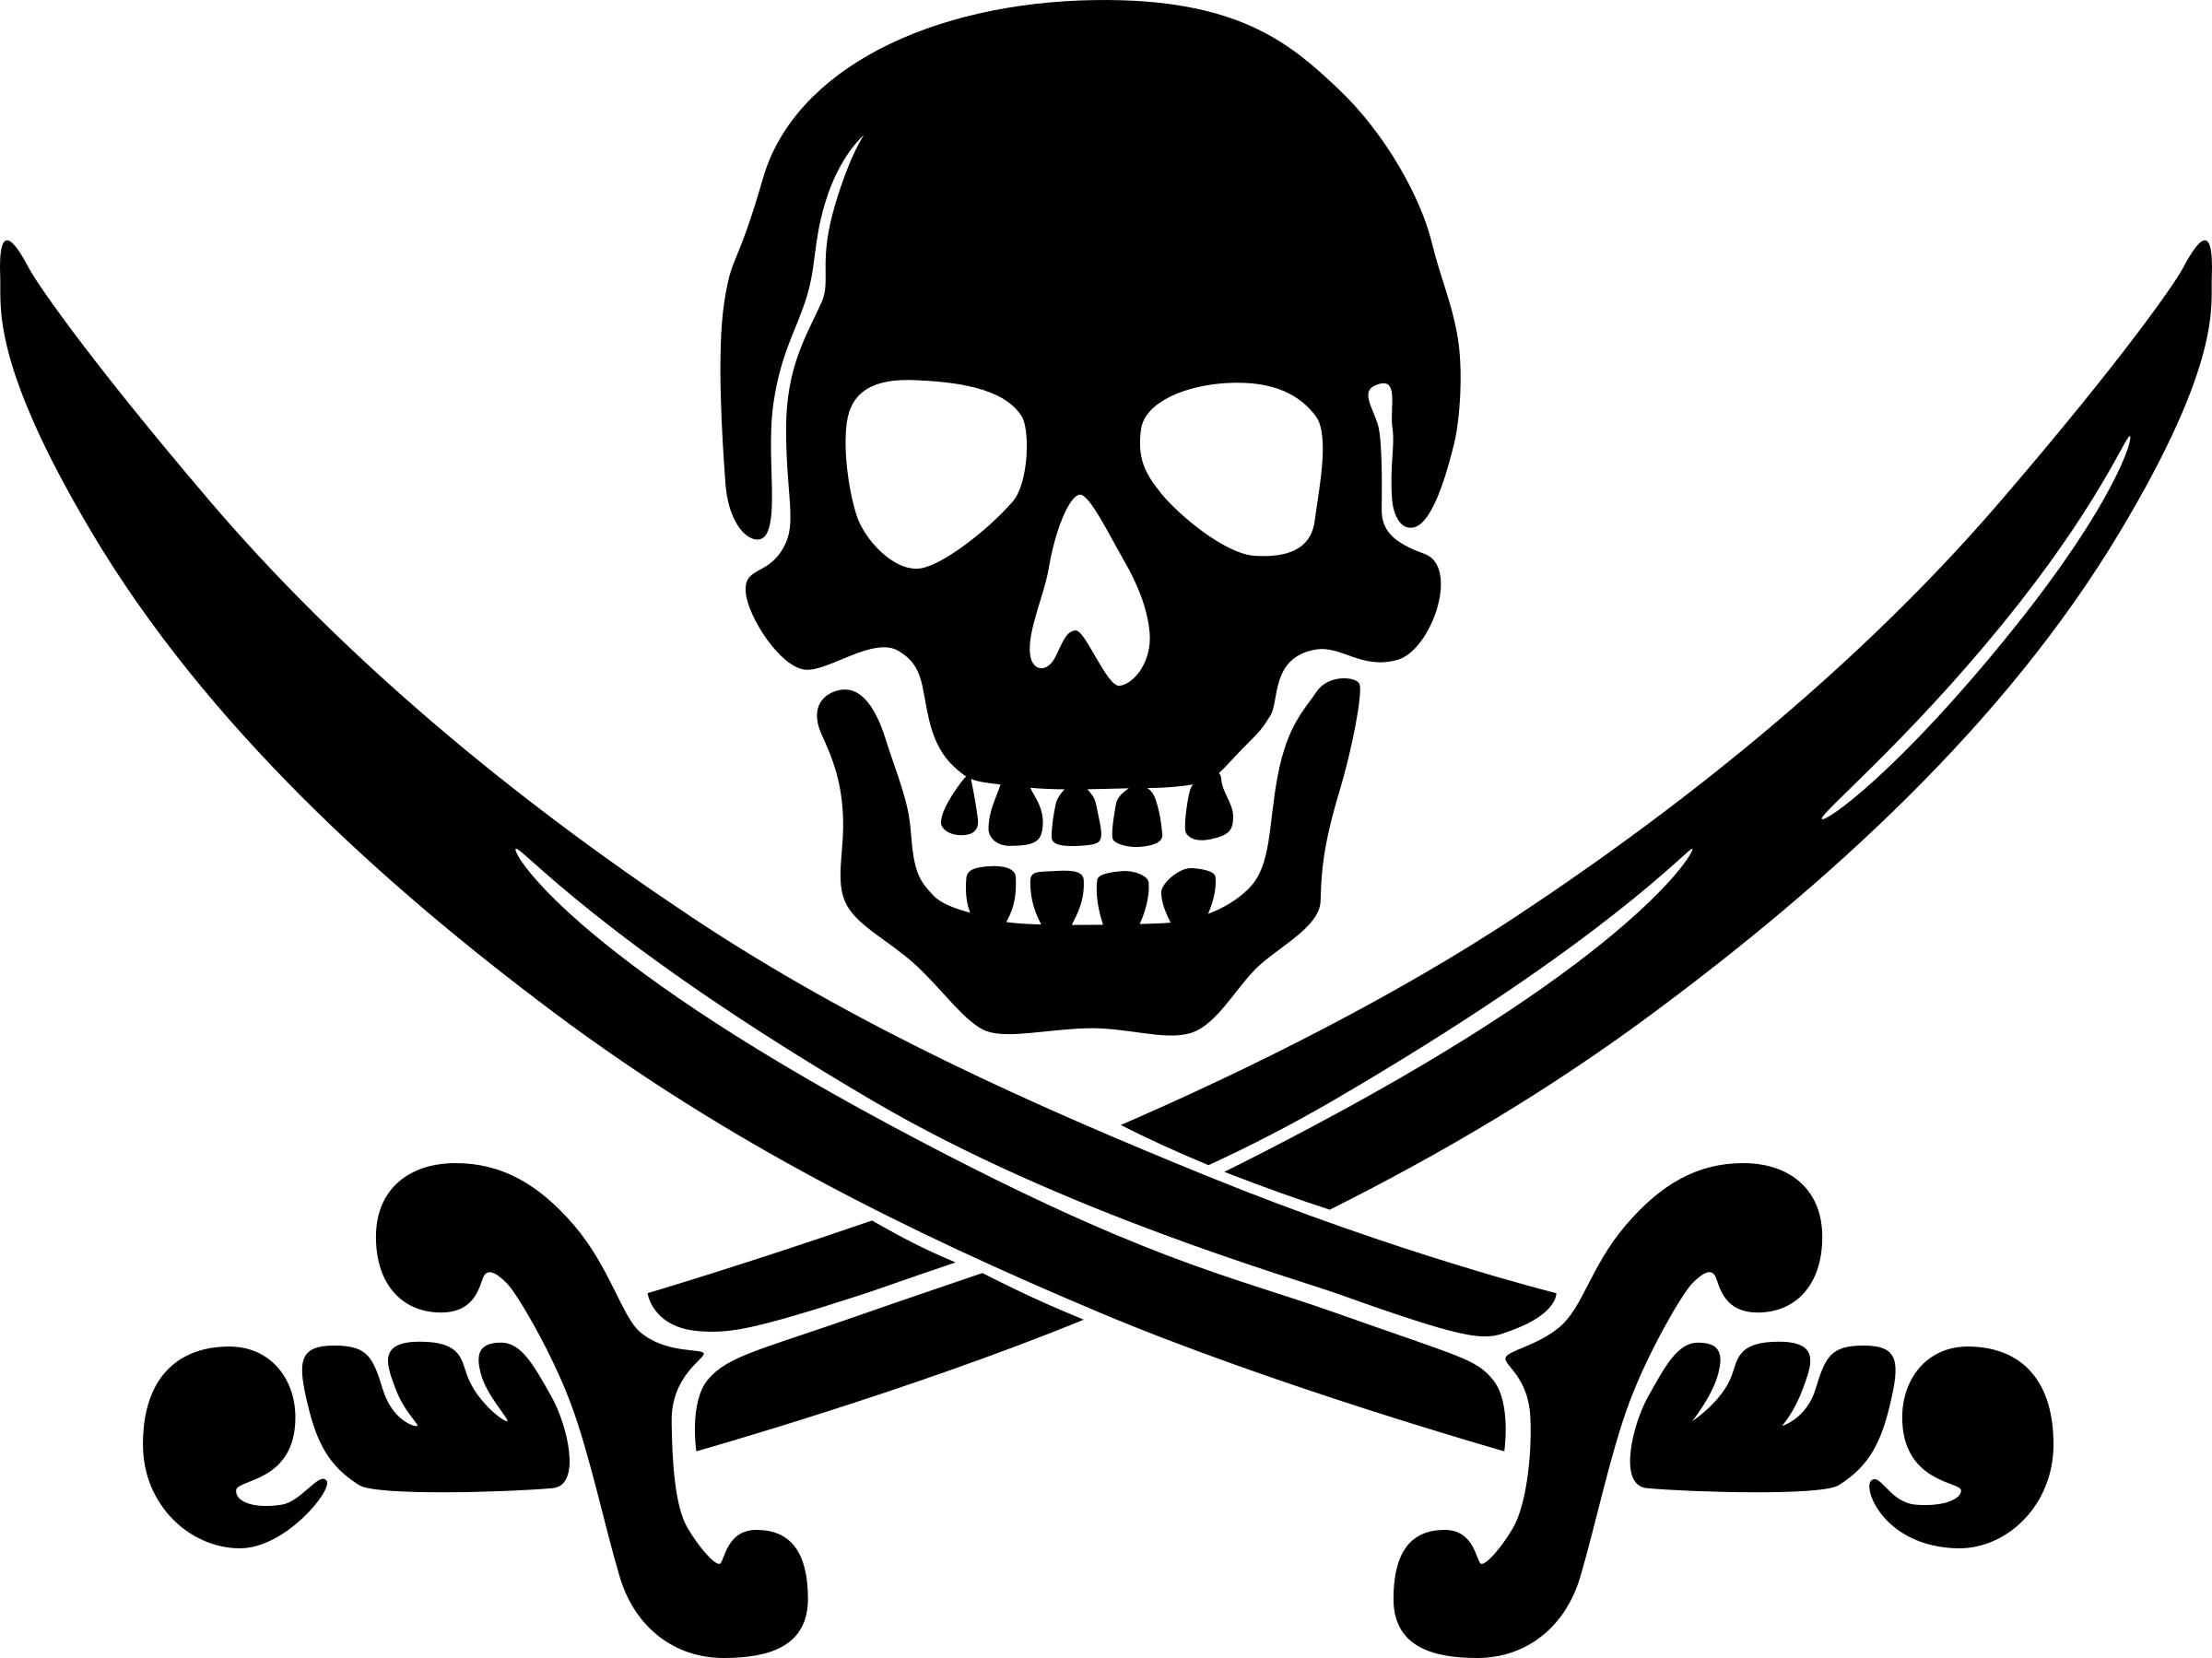 Calico Jack pirate logo png icons